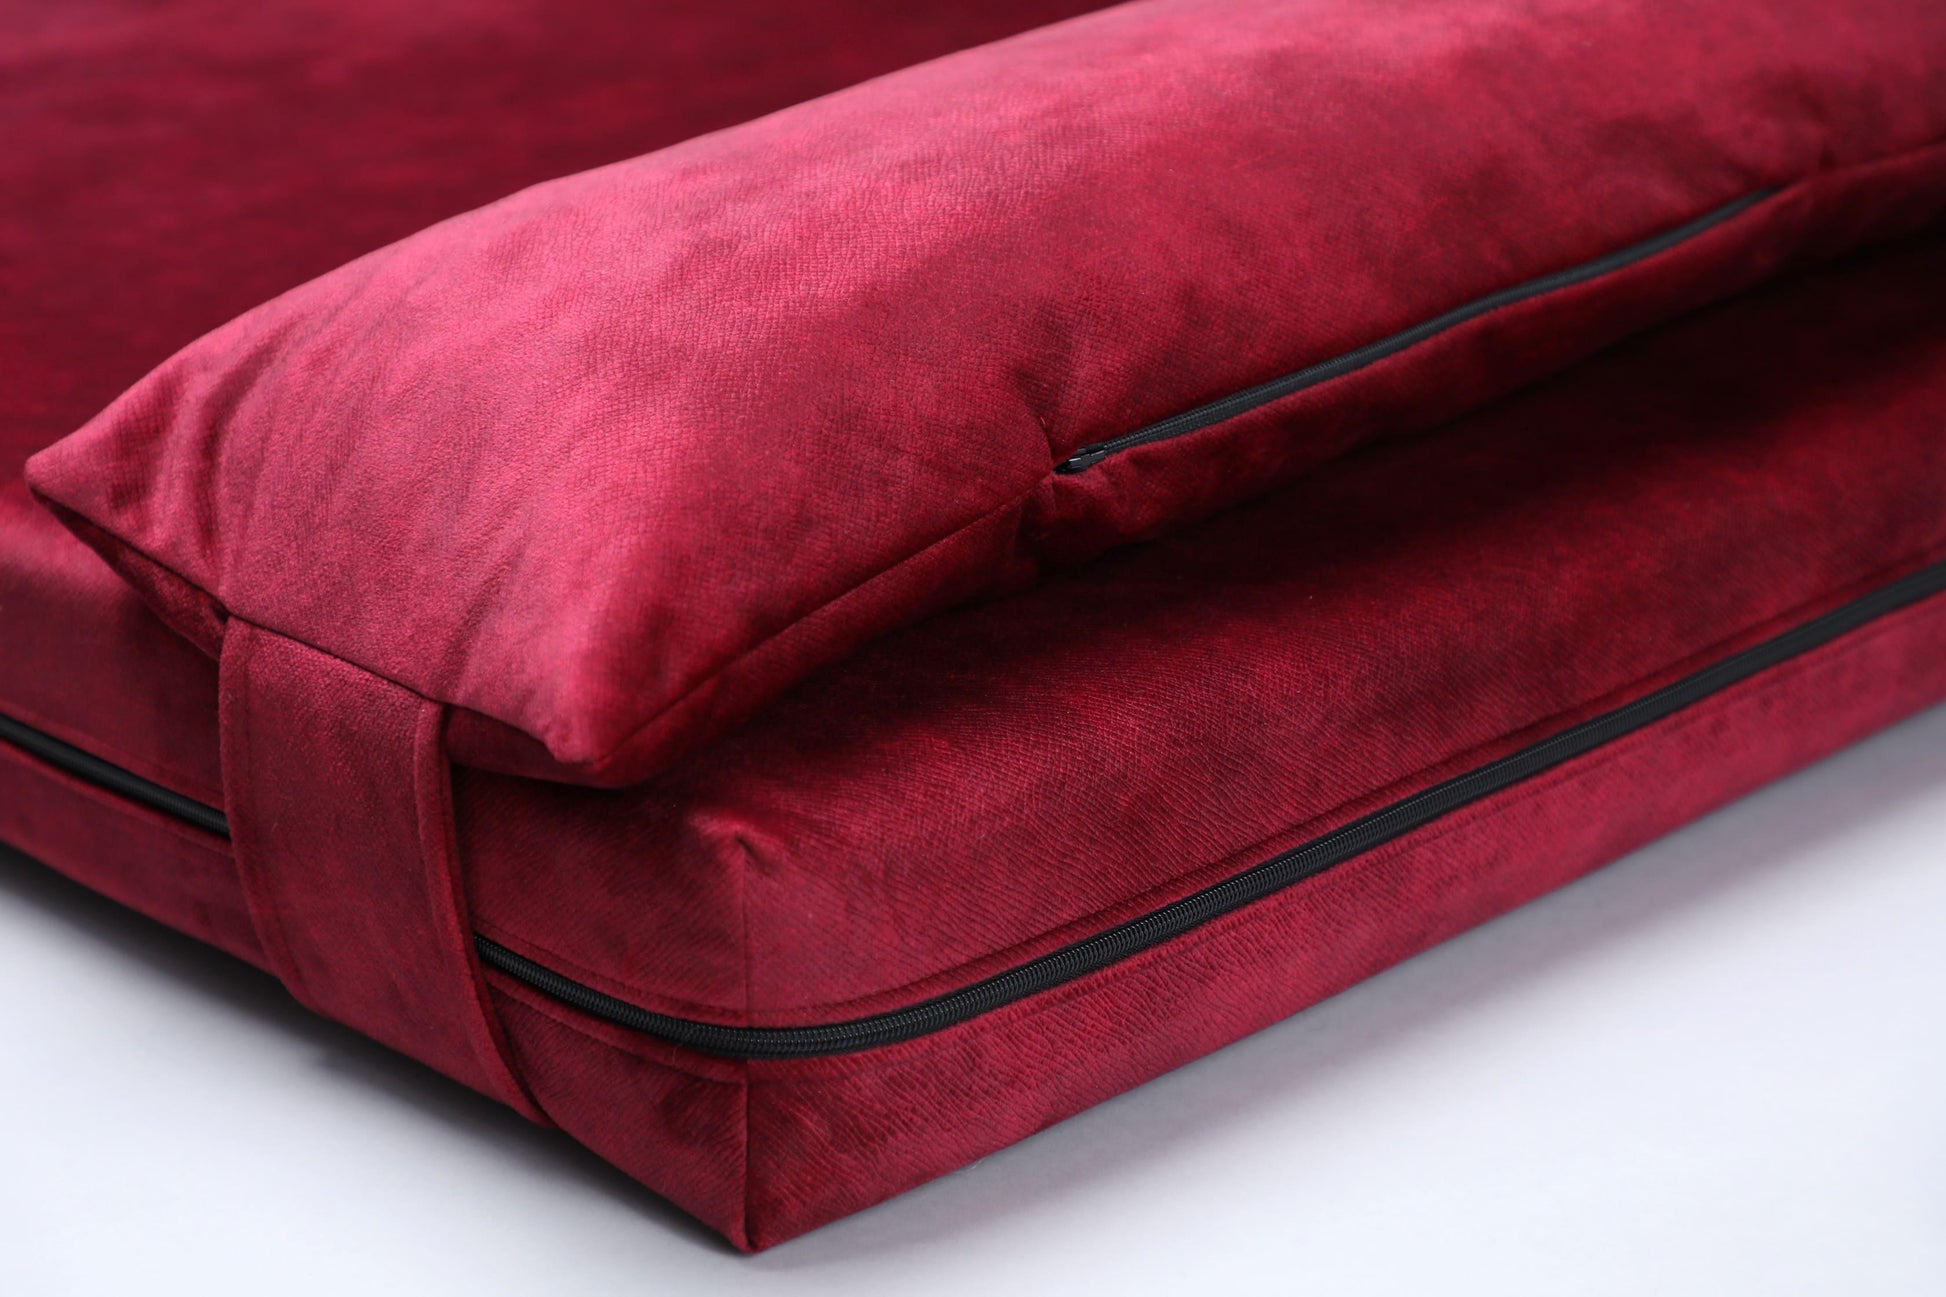 2-sided extra large & supportive dog bed. RUBY RED - premium dog goods handmade in Europe by My Wild Other